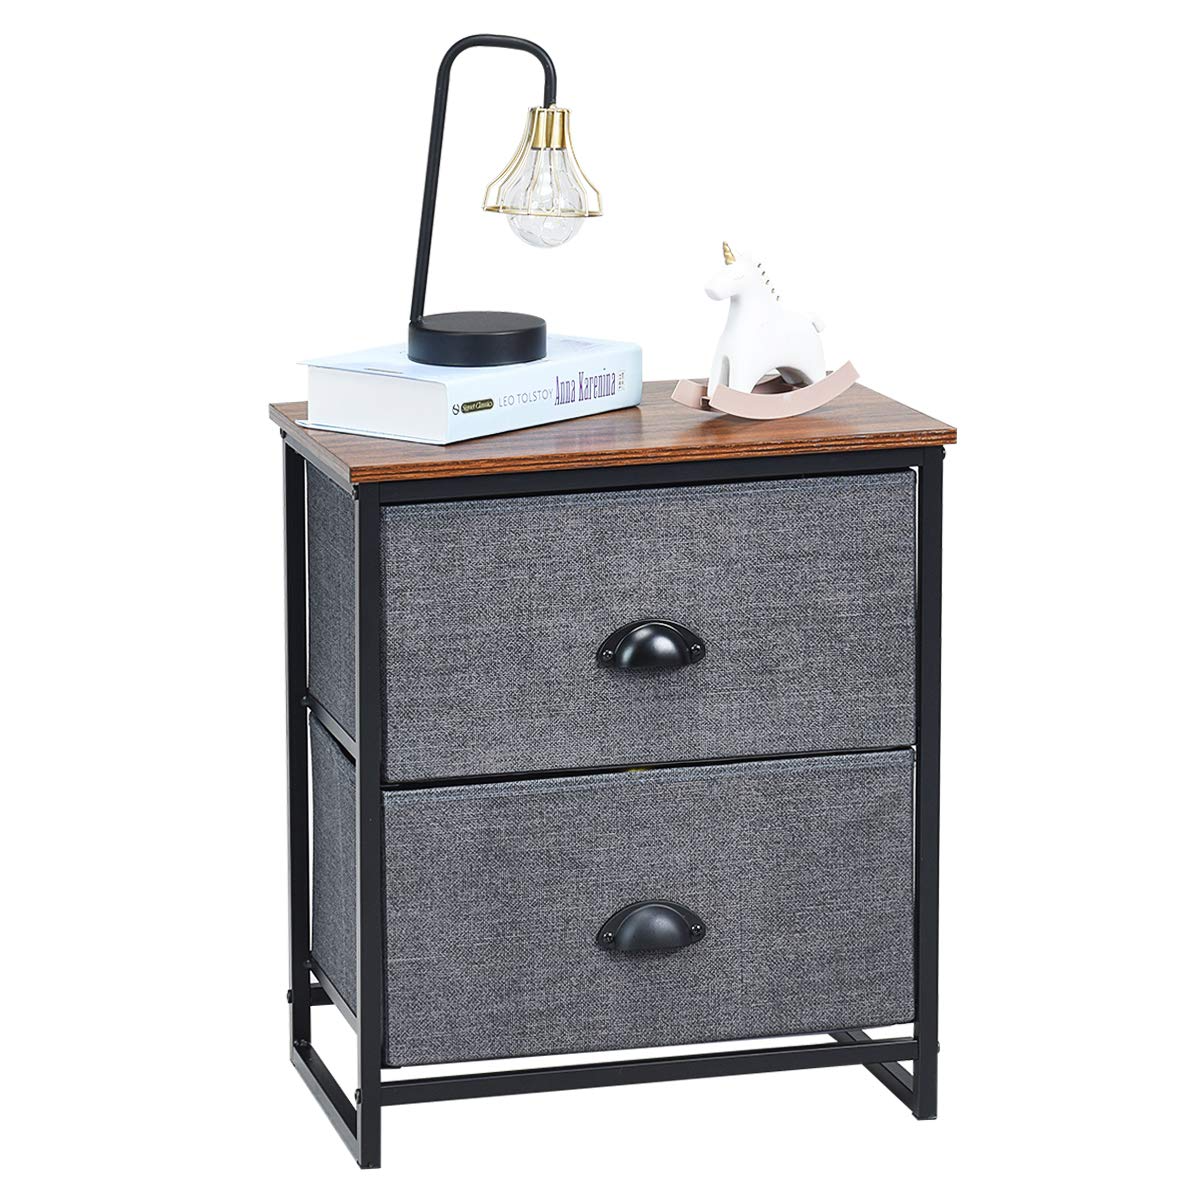 Giantex Nightstand W/Fabric Drawers, Sturdy Steel Frame and Wood Top Organizer Unit